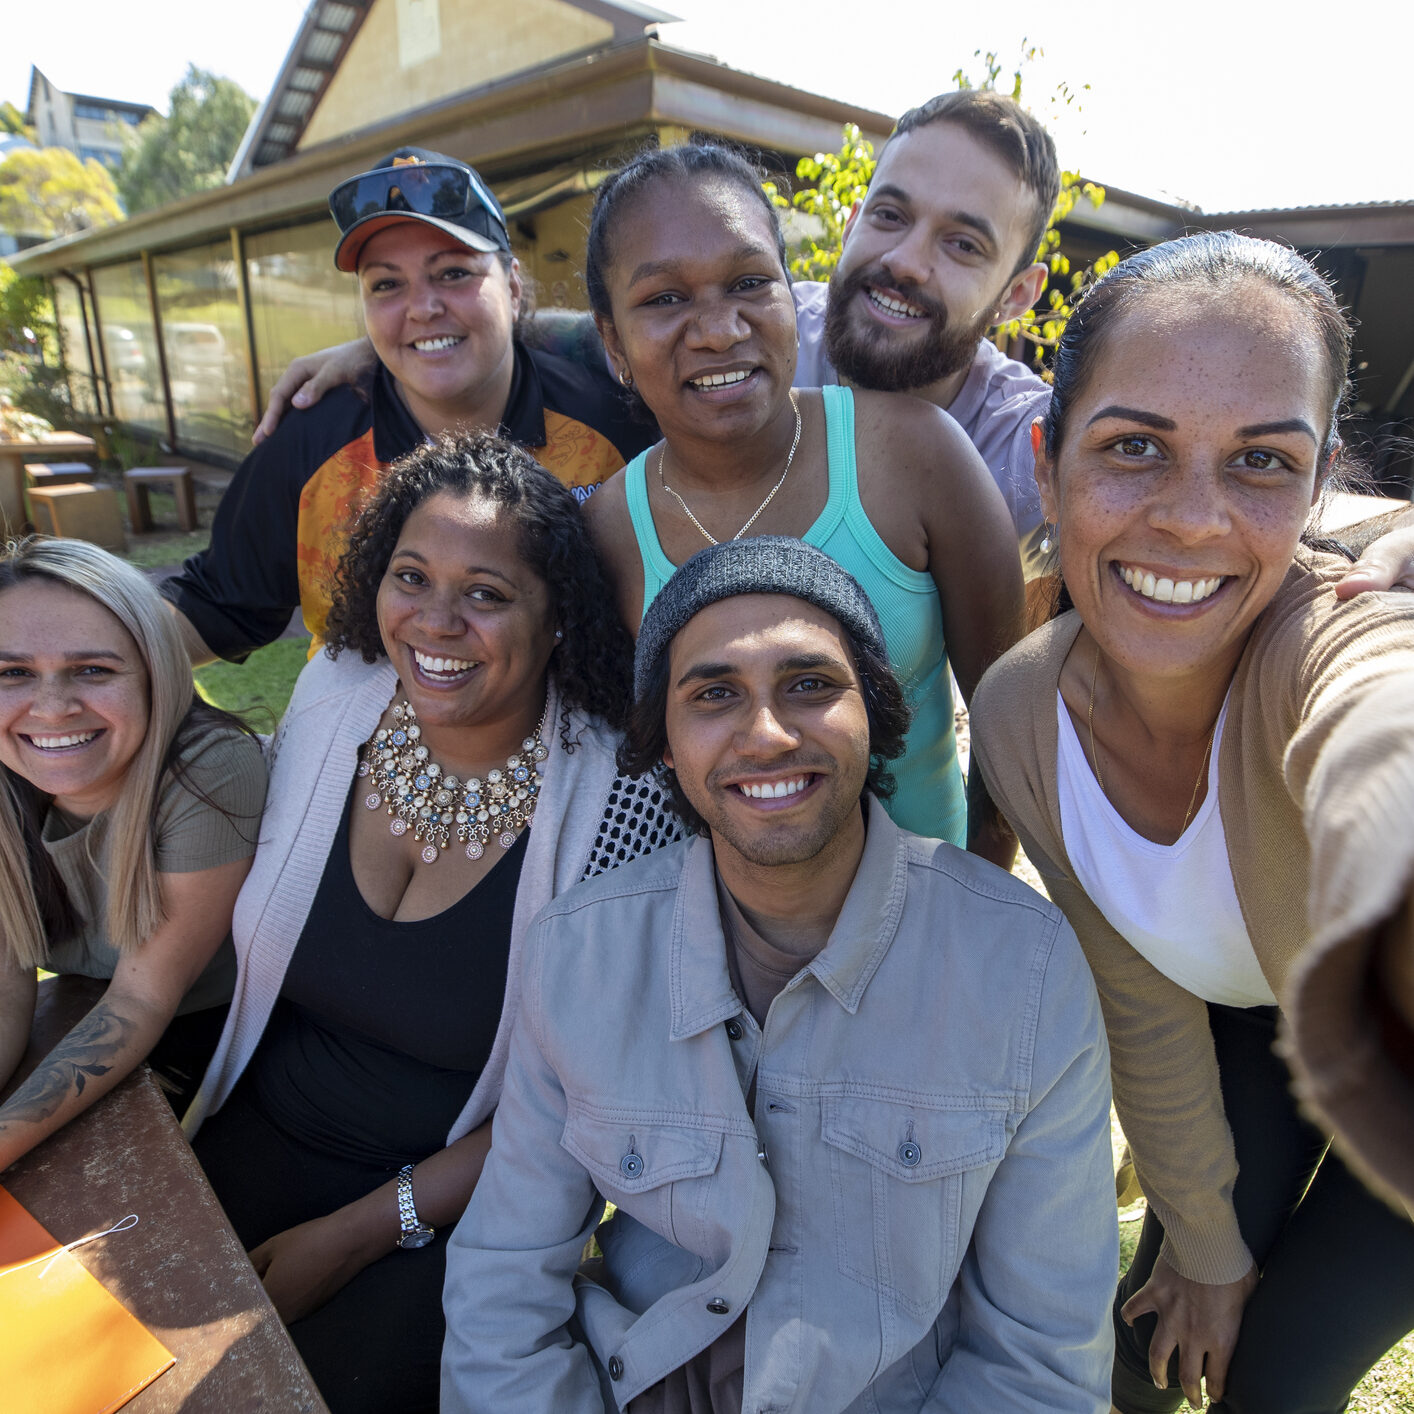 Young aboriginal students and their tutor taking a selfie together outdoors in Australia.